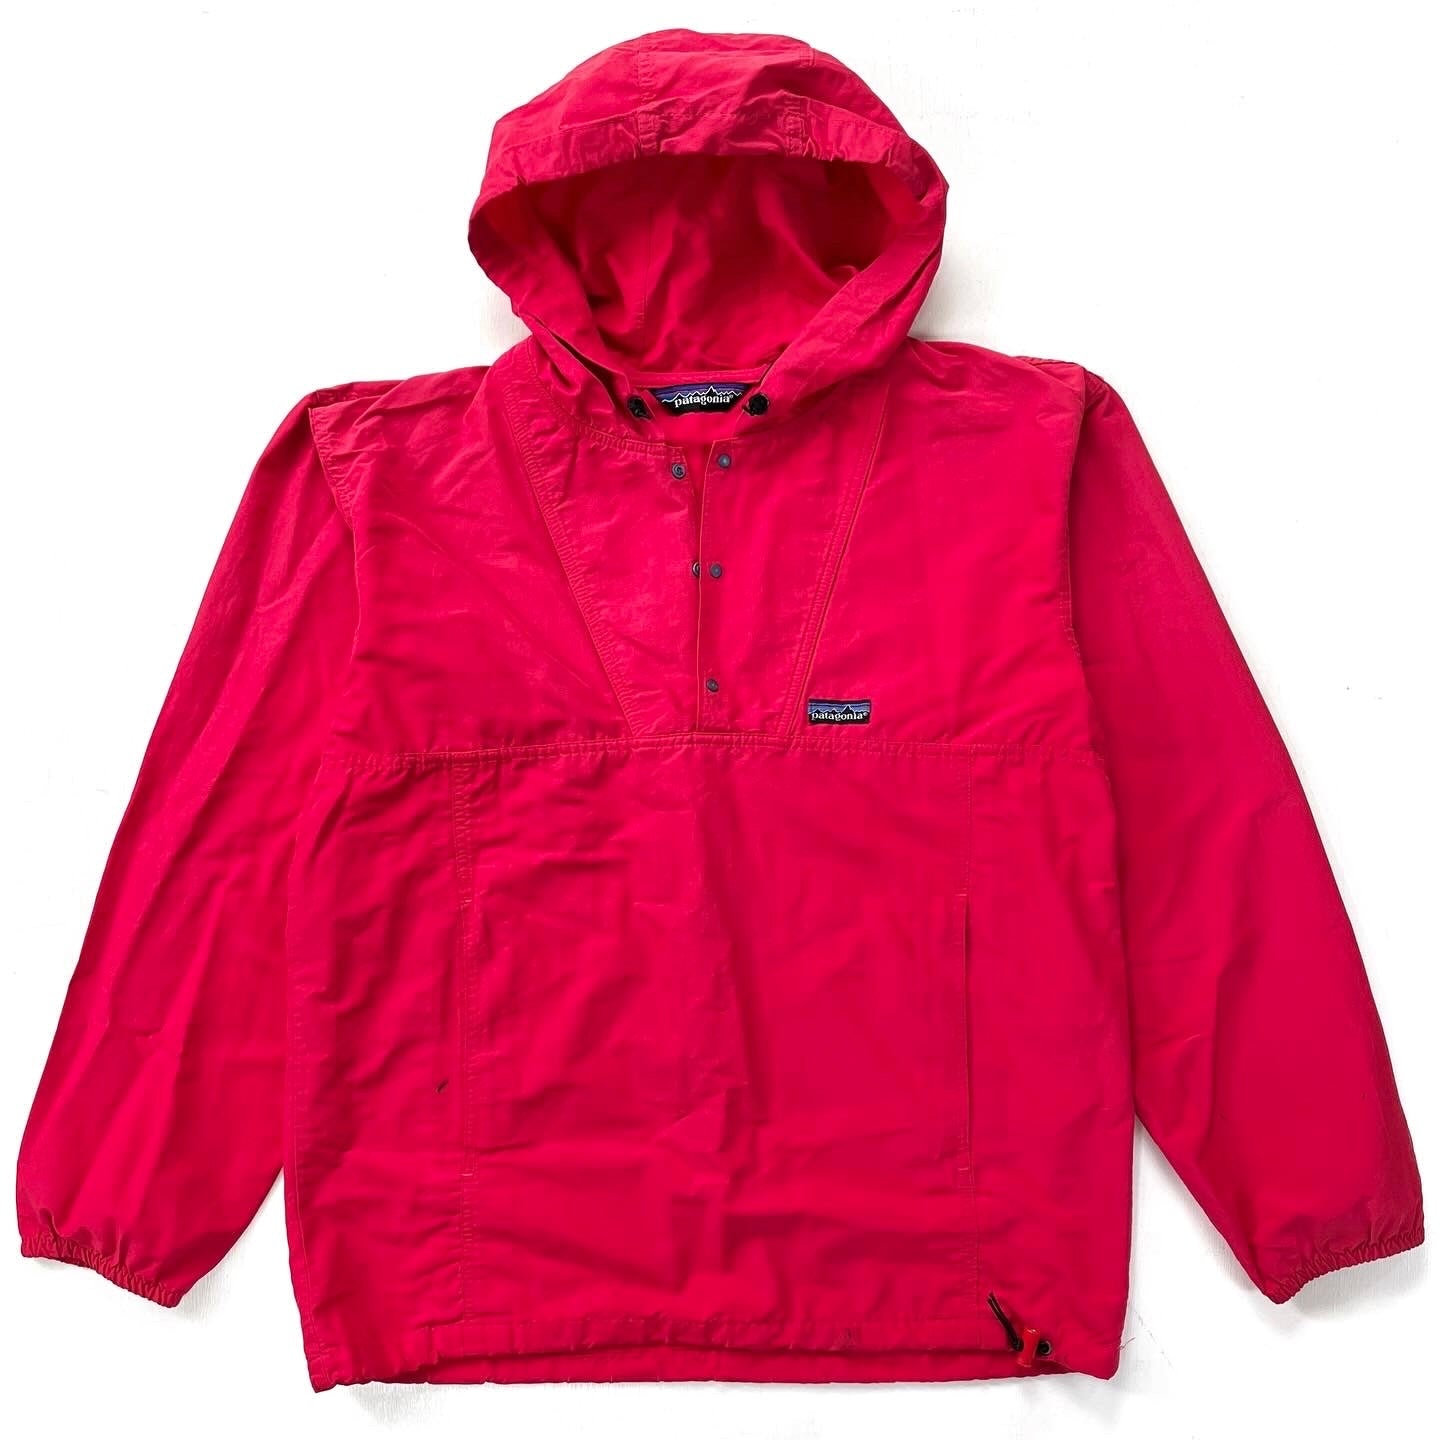 1988 Patagonia Made In The U.S.A. Baggies Pullover, Red (M)